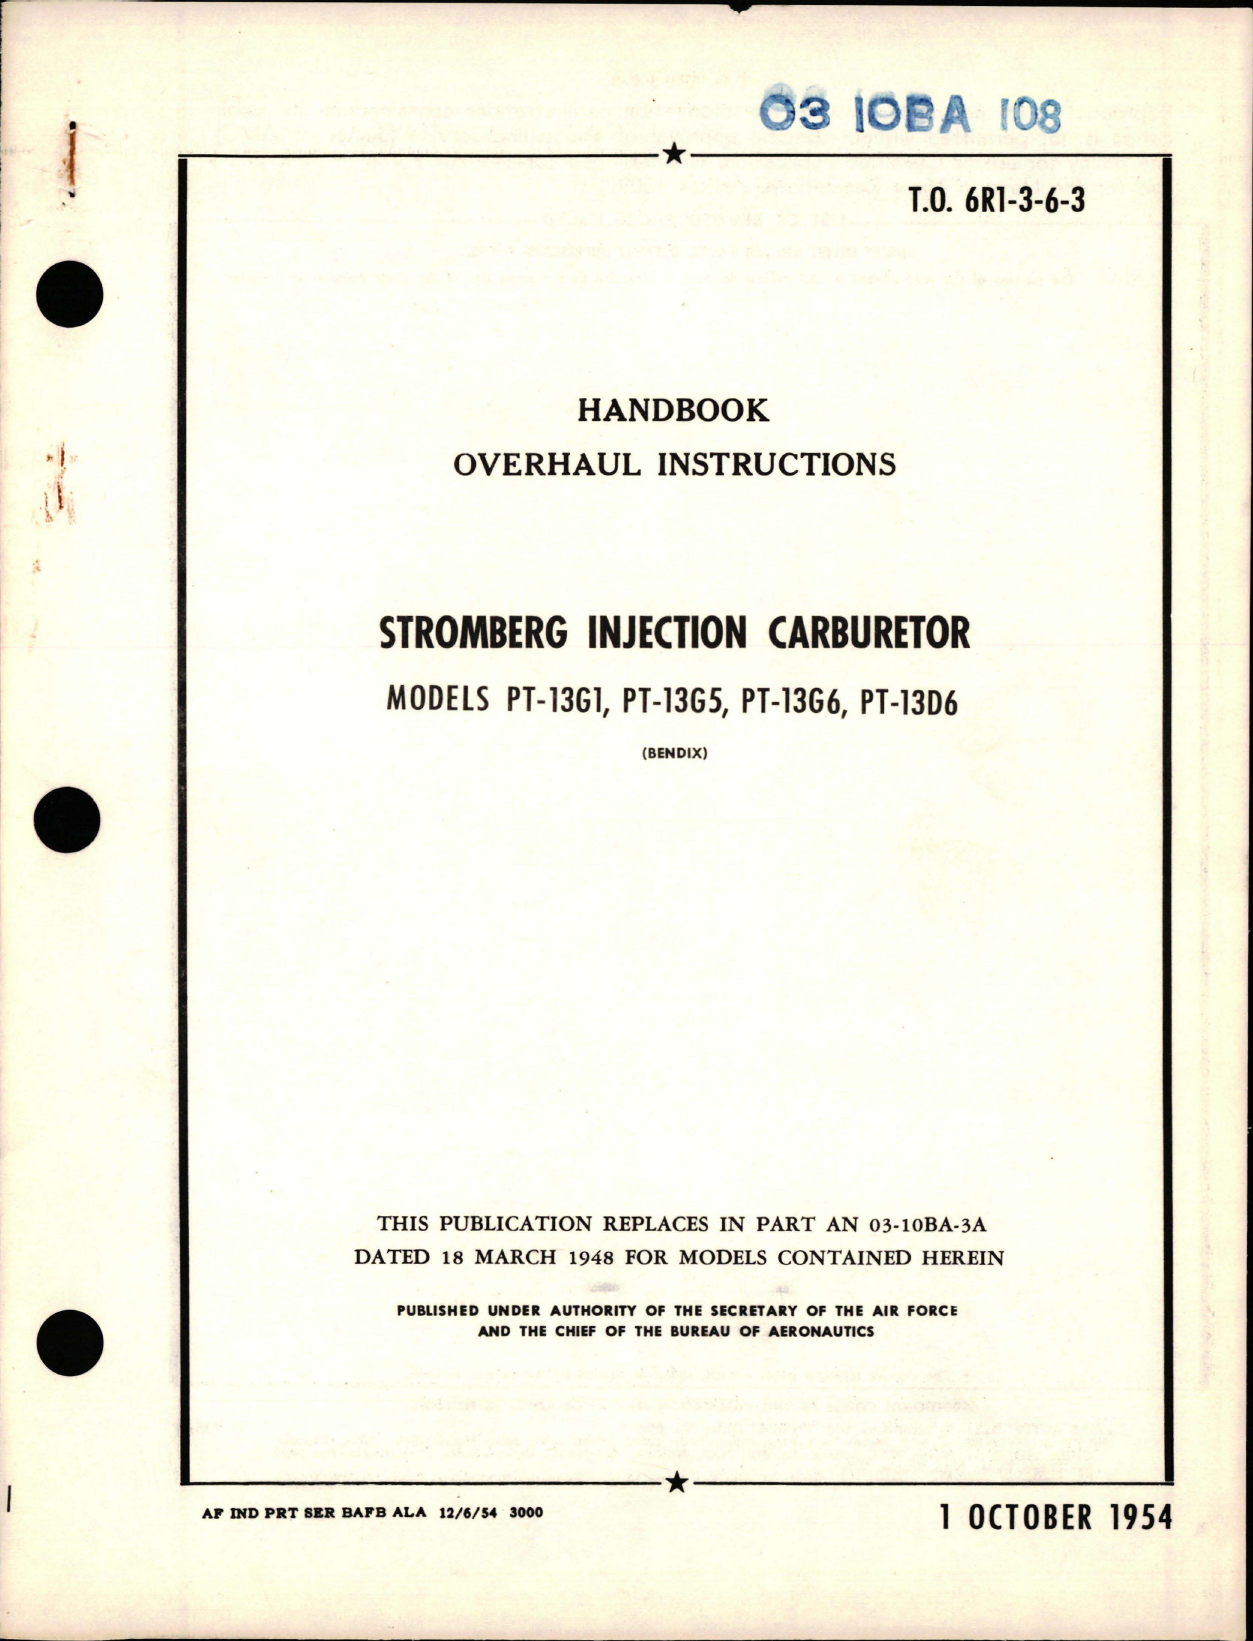 Sample page 1 from AirCorps Library document: Overhaul Instructions for Stromberg Injection Carburetor - Models PT-13G1, PT-3G5, PT-13G6, and PT-13D6